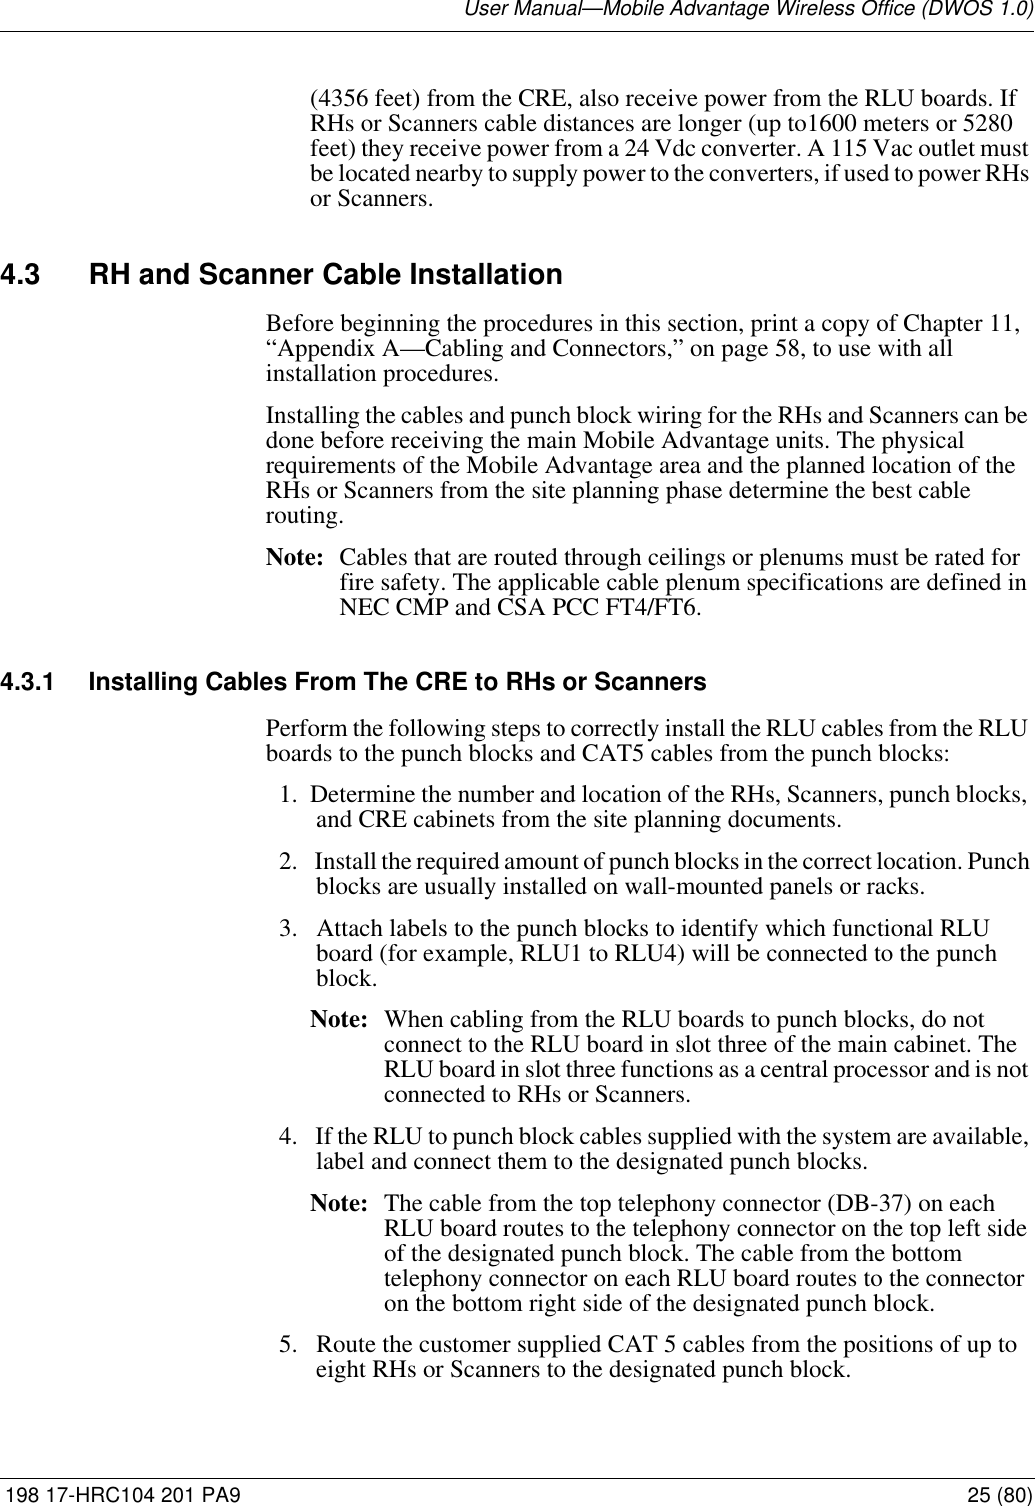 User Manual—Mobile Advantage Wireless Office (DWOS 1.0) 198 17-HRC104 201 PA9 25 (80)(4356 feet) from the CRE, also receive power from the RLU boards. If RHs or Scanners cable distances are longer (up to1600 meters or 5280 feet) they receive power from a 24 Vdc converter. A 115 Vac outlet must be located nearby to supply power to the converters, if used to power RHs or Scanners.4.3 RH and Scanner Cable InstallationBefore beginning the procedures in this section, print a copy of Chapter 11, “Appendix A—Cabling and Connectors,” on page 58, to use with all installation procedures. Installing the cables and punch block wiring for the RHs and Scanners can be done before receiving the main Mobile Advantage units. The physical requirements of the Mobile Advantage area and the planned location of the RHs or Scanners from the site planning phase determine the best cable routing. Note: Cables that are routed through ceilings or plenums must be rated for fire safety. The applicable cable plenum specifications are defined in NEC CMP and CSA PCC FT4/FT6. 4.3.1 Installing Cables From The CRE to RHs or ScannersPerform the following steps to correctly install the RLU cables from the RLU boards to the punch blocks and CAT5 cables from the punch blocks:1. Determine the number and location of the RHs, Scanners, punch blocks, and CRE cabinets from the site planning documents.  2.  Install the required amount of punch blocks in the correct location. Punch blocks are usually installed on wall-mounted panels or racks.  3.  Attach labels to the punch blocks to identify which functional RLU board (for example, RLU1 to RLU4) will be connected to the punch block. Note: When cabling from the RLU boards to punch blocks, do not connect to the RLU board in slot three of the main cabinet. The RLU board in slot three functions as a central processor and is not connected to RHs or Scanners. 4.  If the RLU to punch block cables supplied with the system are available, label and connect them to the designated punch blocks. Note: The cable from the top telephony connector (DB-37) on each RLU board routes to the telephony connector on the top left side of the designated punch block. The cable from the bottom telephony connector on each RLU board routes to the connector on the bottom right side of the designated punch block. 5.  Route the customer supplied CAT 5 cables from the positions of up to eight RHs or Scanners to the designated punch block.